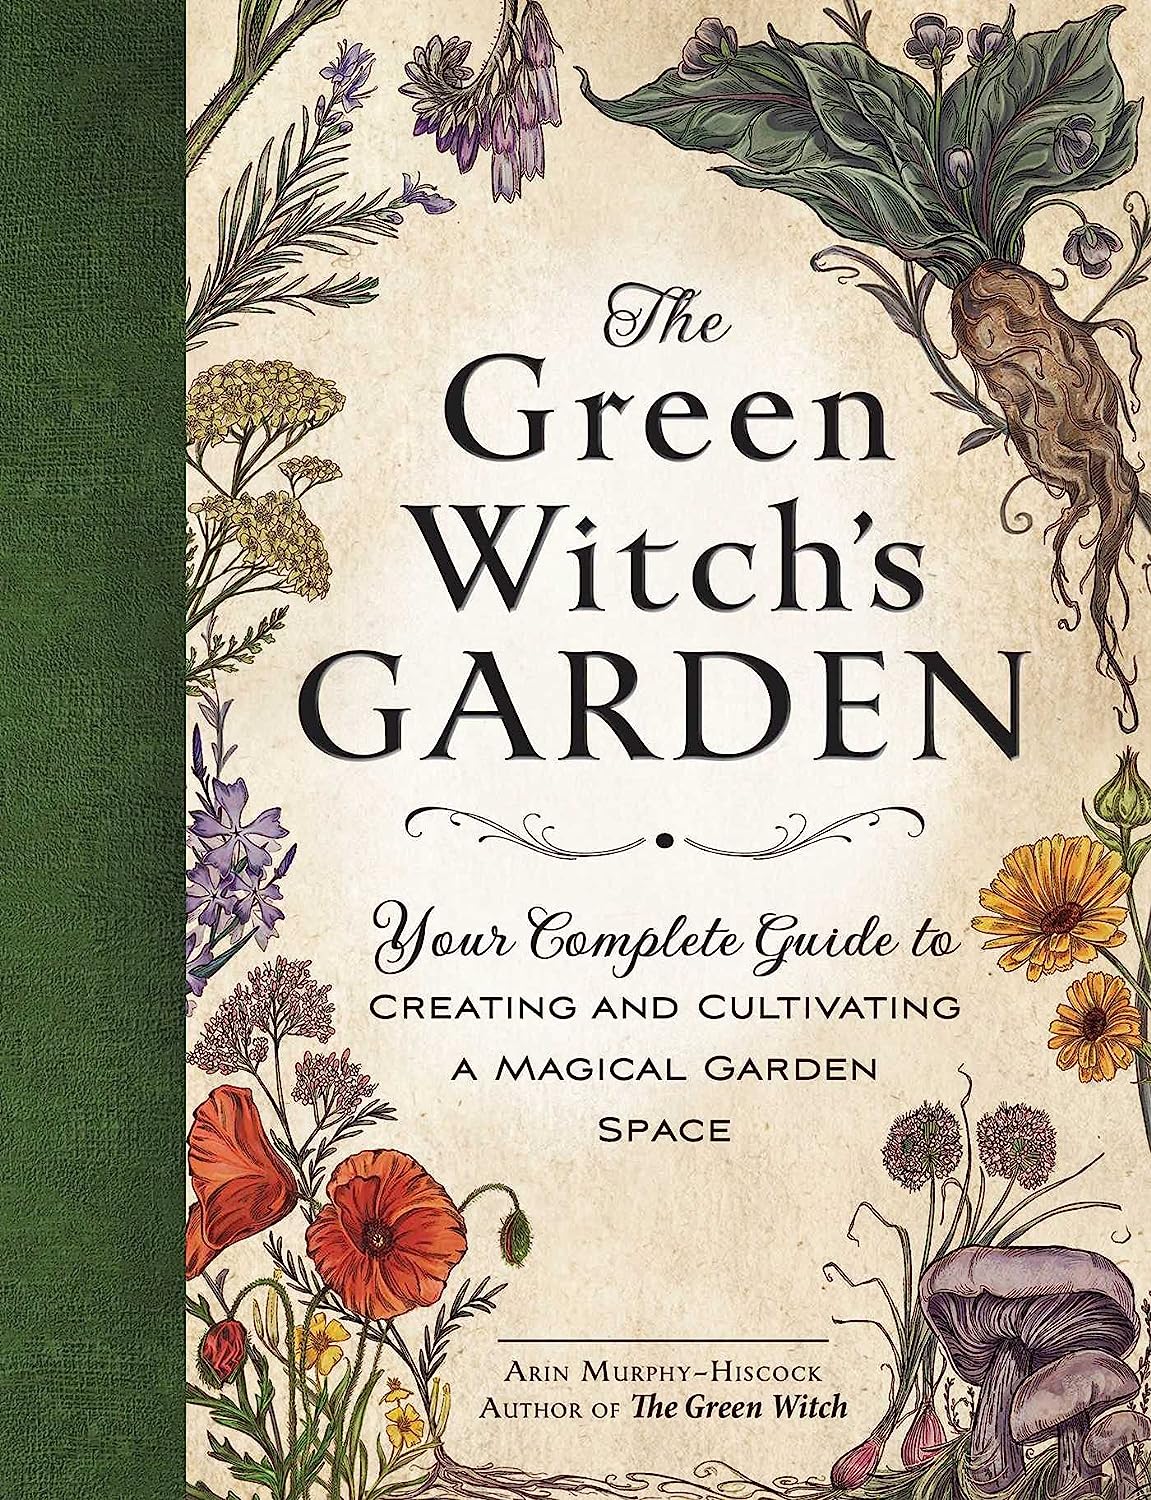 The Green Witch's Garden: Your Complete Guide to Creating and Cultivating a Magical Garden Space (Hardcover)